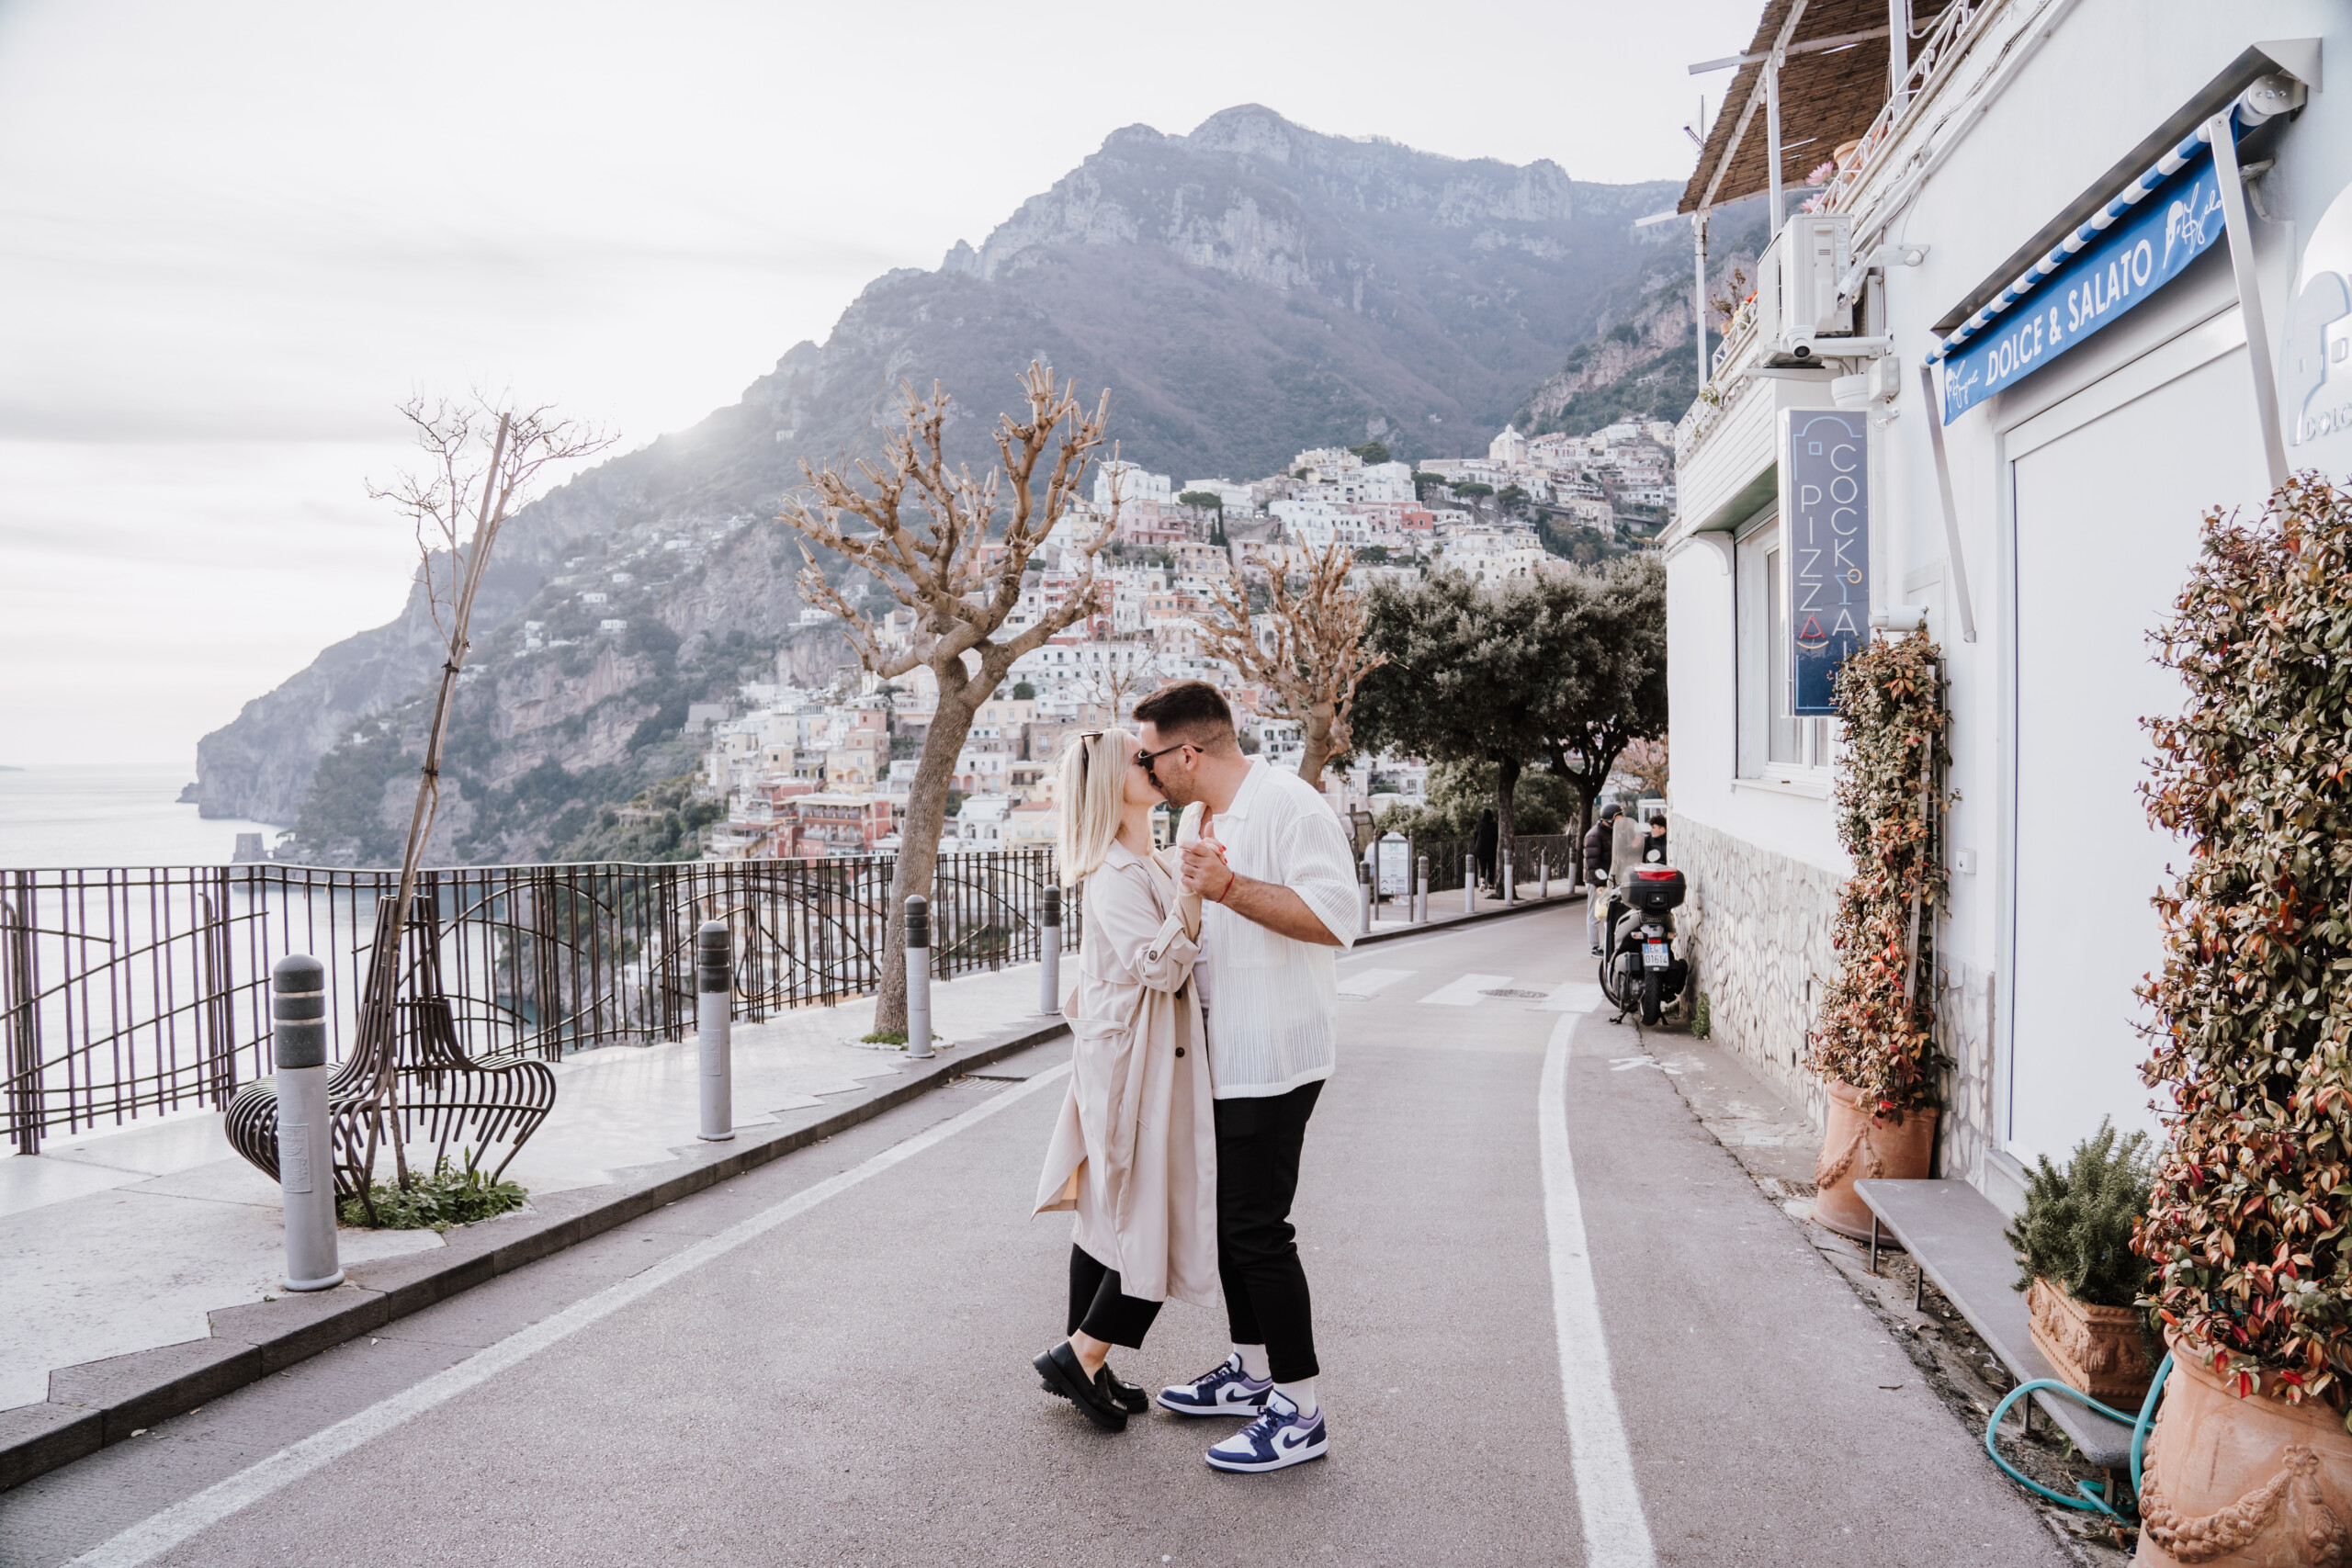 Proposal photoshoot by Mimmo, Localgrapher in Positano